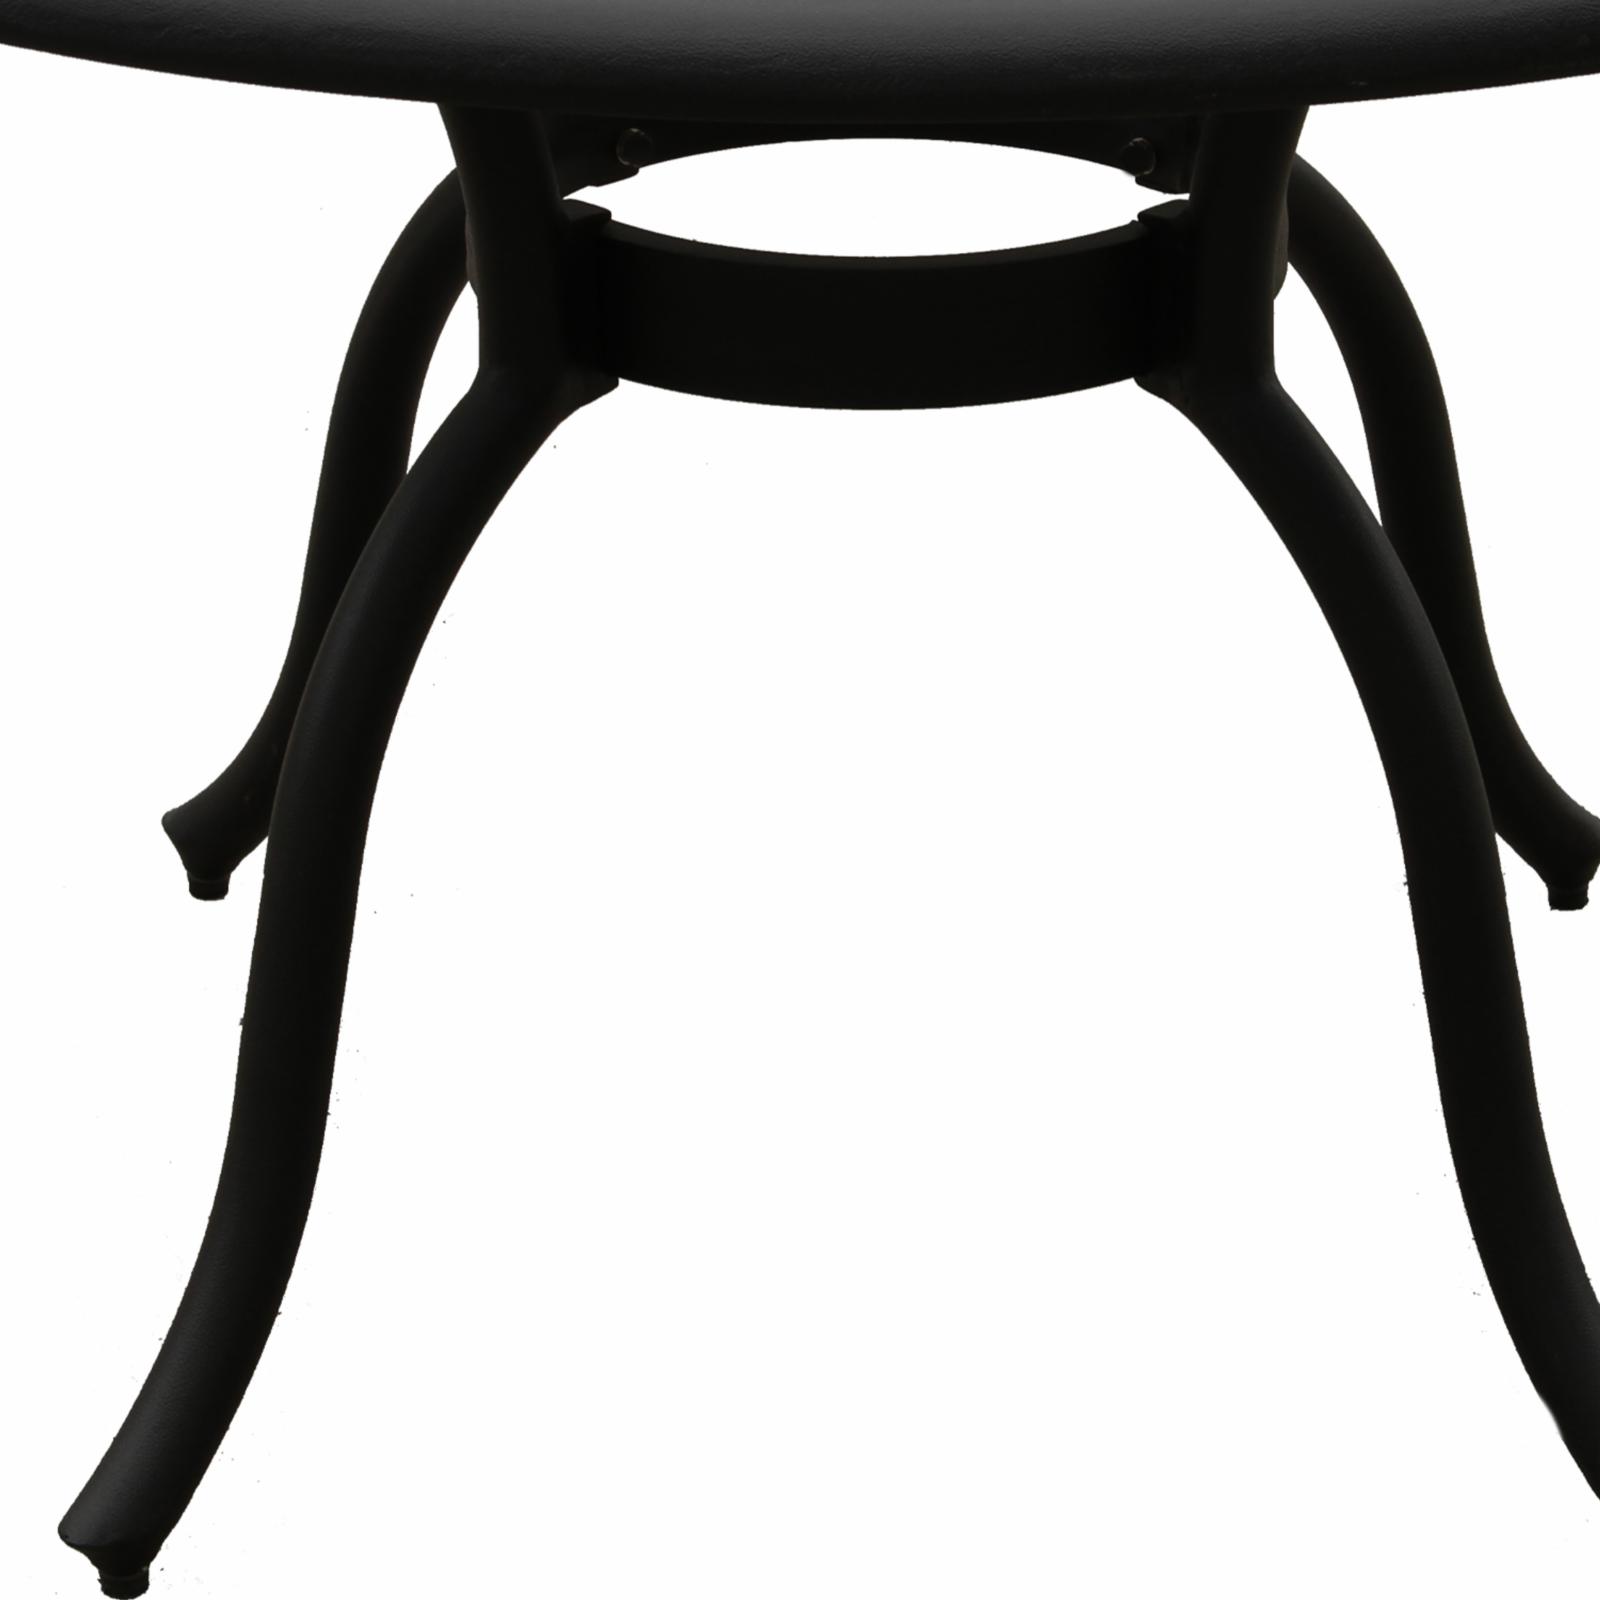 Oakland Living Modern Outdoor Mesh Aluminum 48 in. Round Patio Dining Table - Black - image 4 of 4